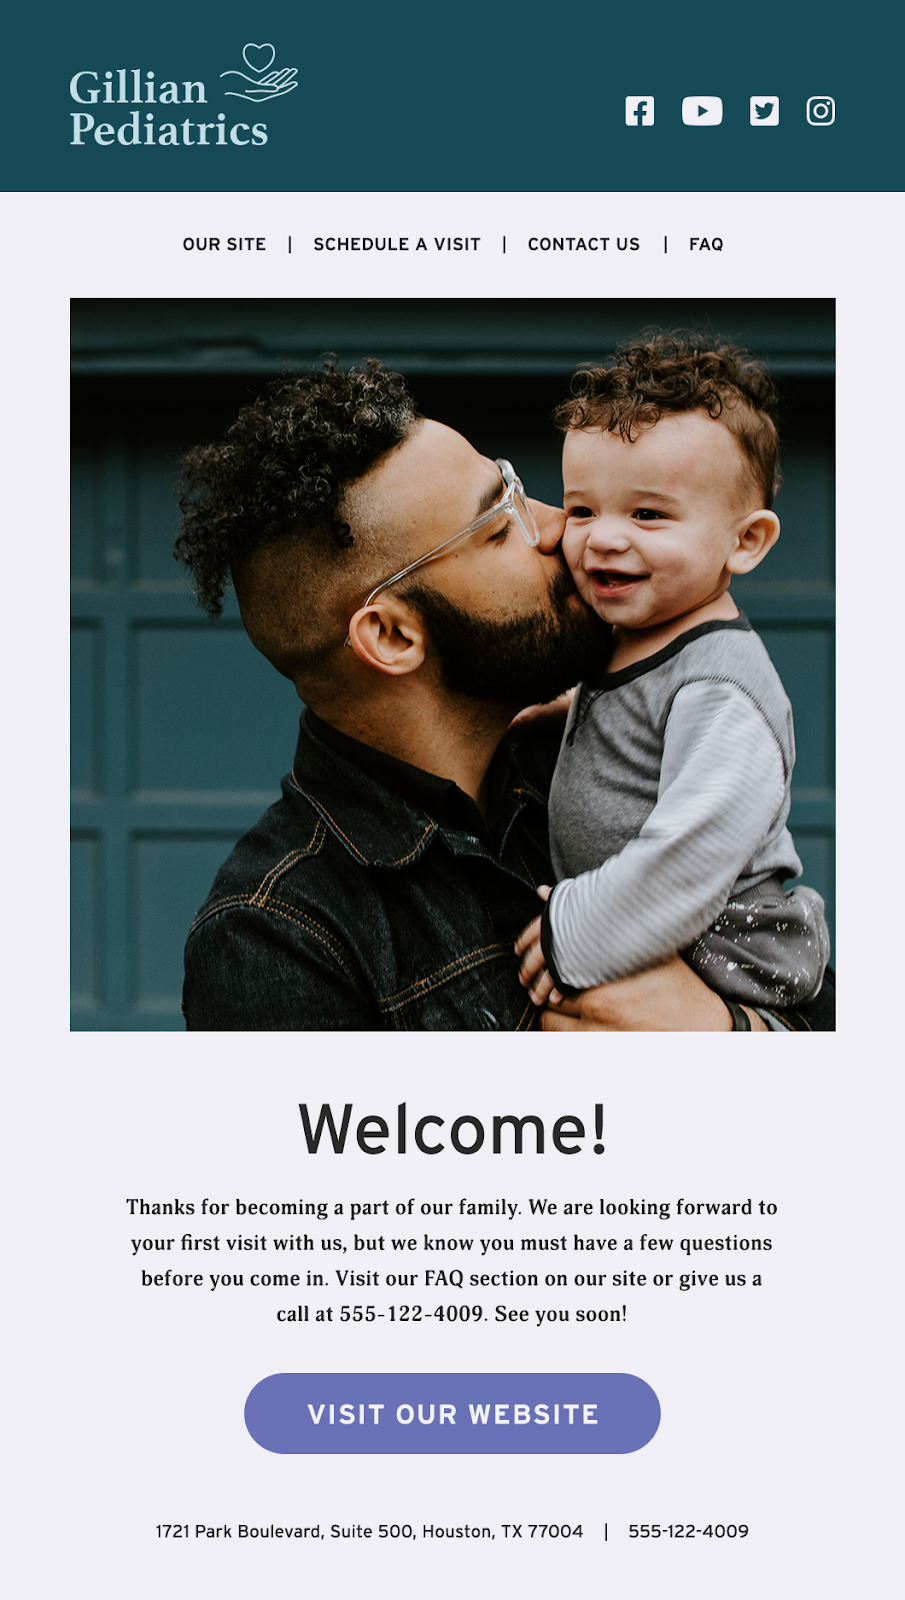 Automated welcome email #1, welcome and deliver